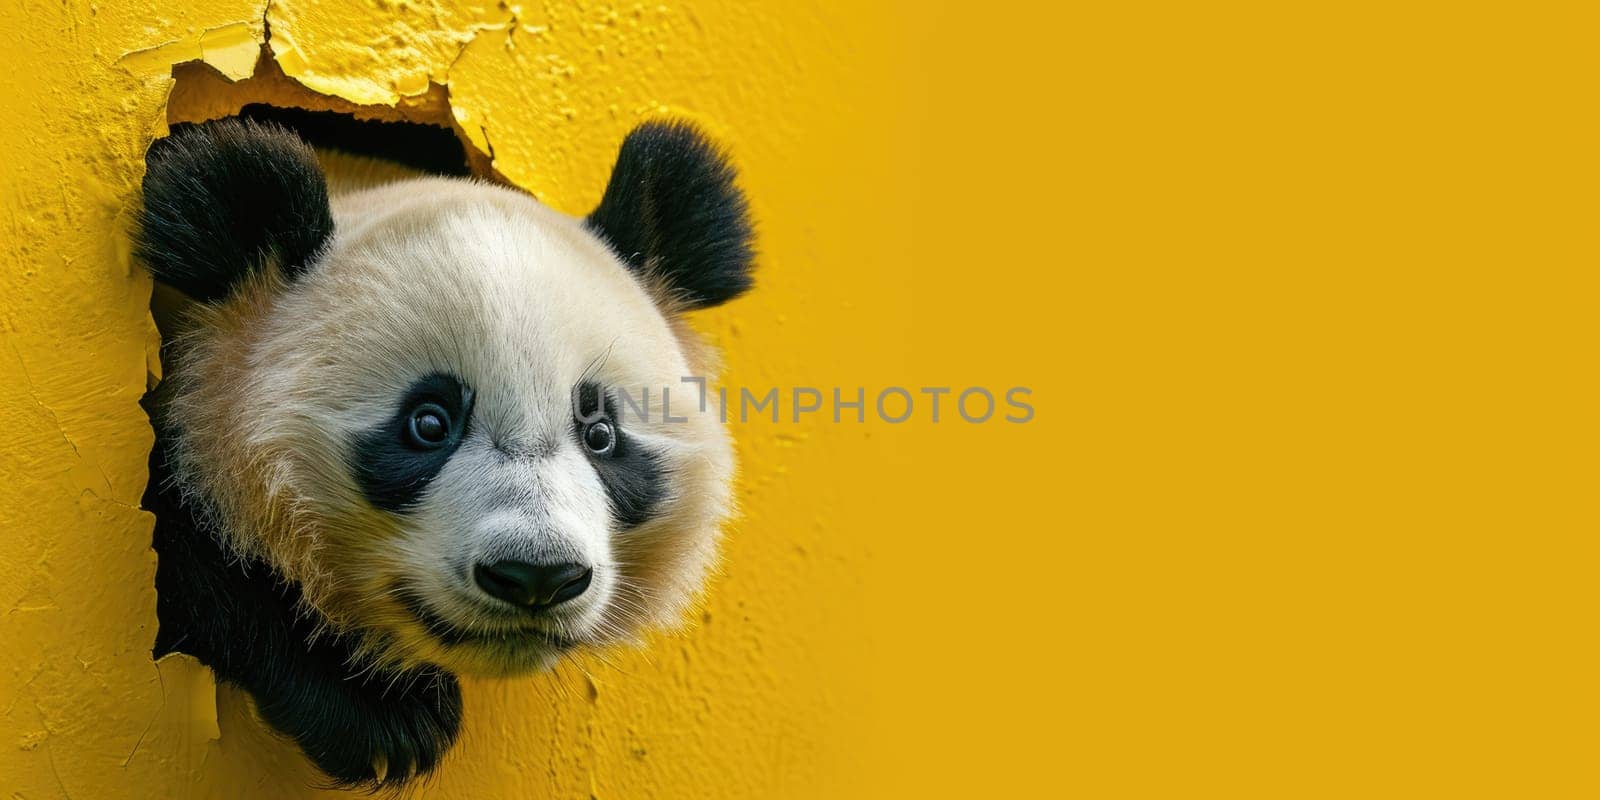 Zoom in picture of breaking yellow wall and the panda in a yellow hole. AIGX03. by biancoblue